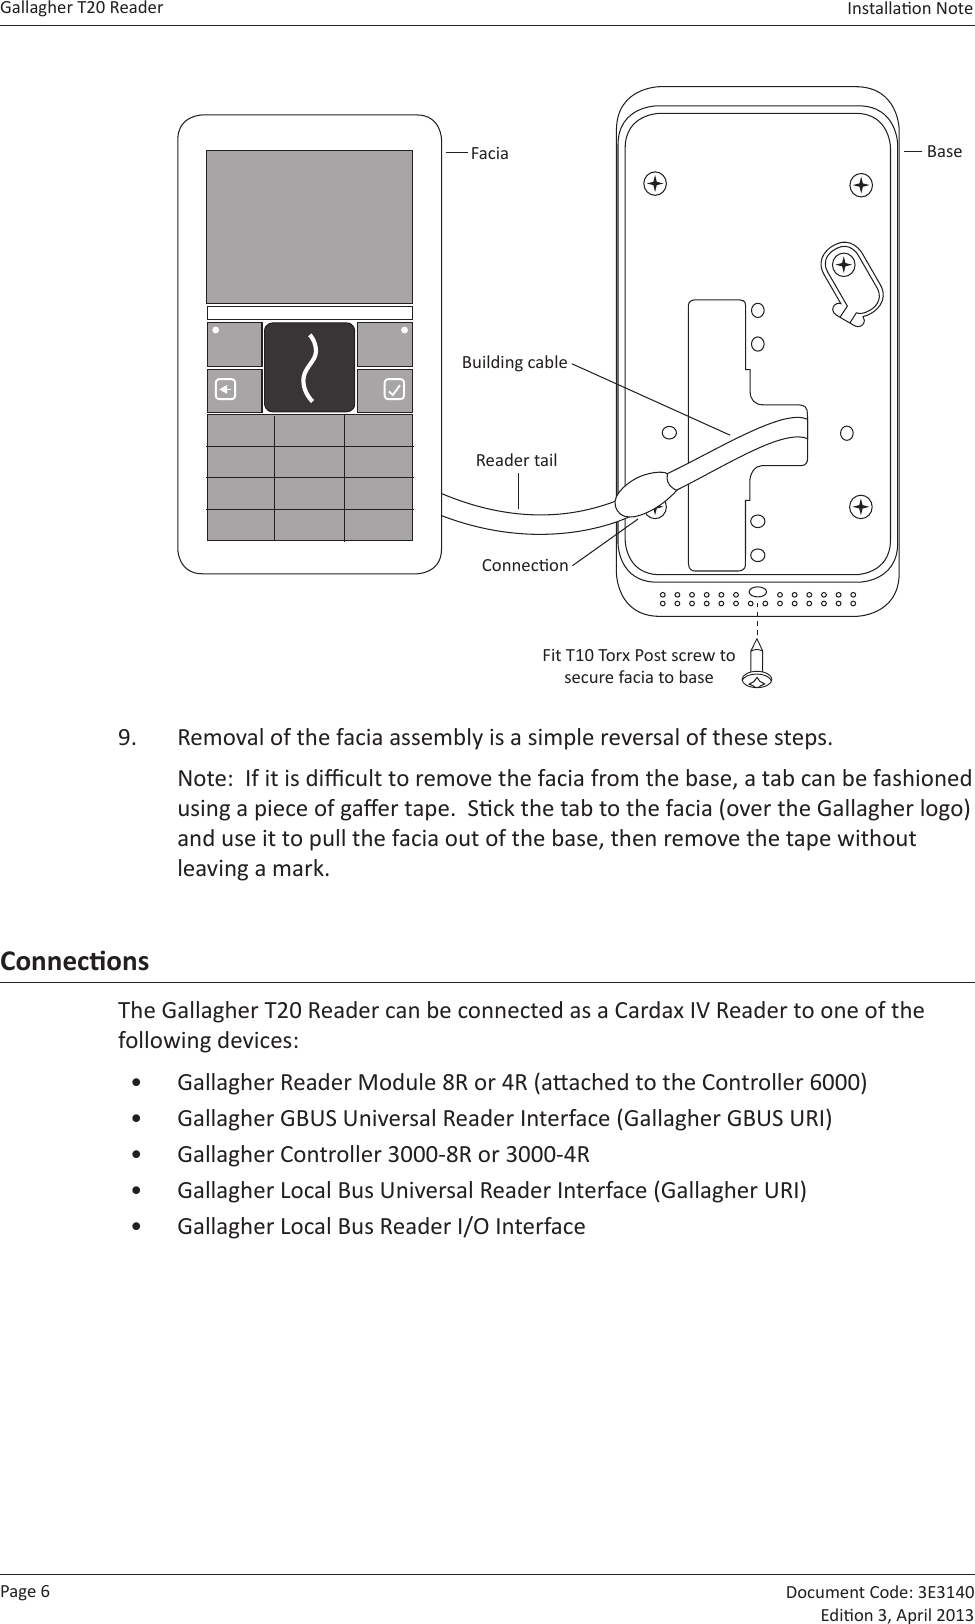 Page 6Gallagher T20 Reader  Document Code: 3E3140 Edion 3, April 2013Installaon Note  BaseFaciaFit T10 Torx Post screw to secure facia to baseBuilding cableReader tailConnecon9.  Removal of the facia assembly is a simple reversal of these steps.Note:  If it is dicult to remove the facia from the base, a tab can be fashioned using a piece of gaer tape.  Sck the tab to the facia (over the Gallagher logo) and use it to pull the facia out of the base, then remove the tape without leaving a mark.ConneconsThe Gallagher T20 Reader can be connected as a Cardax IV Reader to one of the following devices:•  Gallagher Reader Module 8R or 4R (aached to the Controller 6000)•  Gallagher GBUS Universal Reader Interface (Gallagher GBUS URI)•  Gallagher Controller 3000-8R or 3000-4R•  Gallagher Local Bus Universal Reader Interface (Gallagher URI)•  Gallagher Local Bus Reader I/O Interface